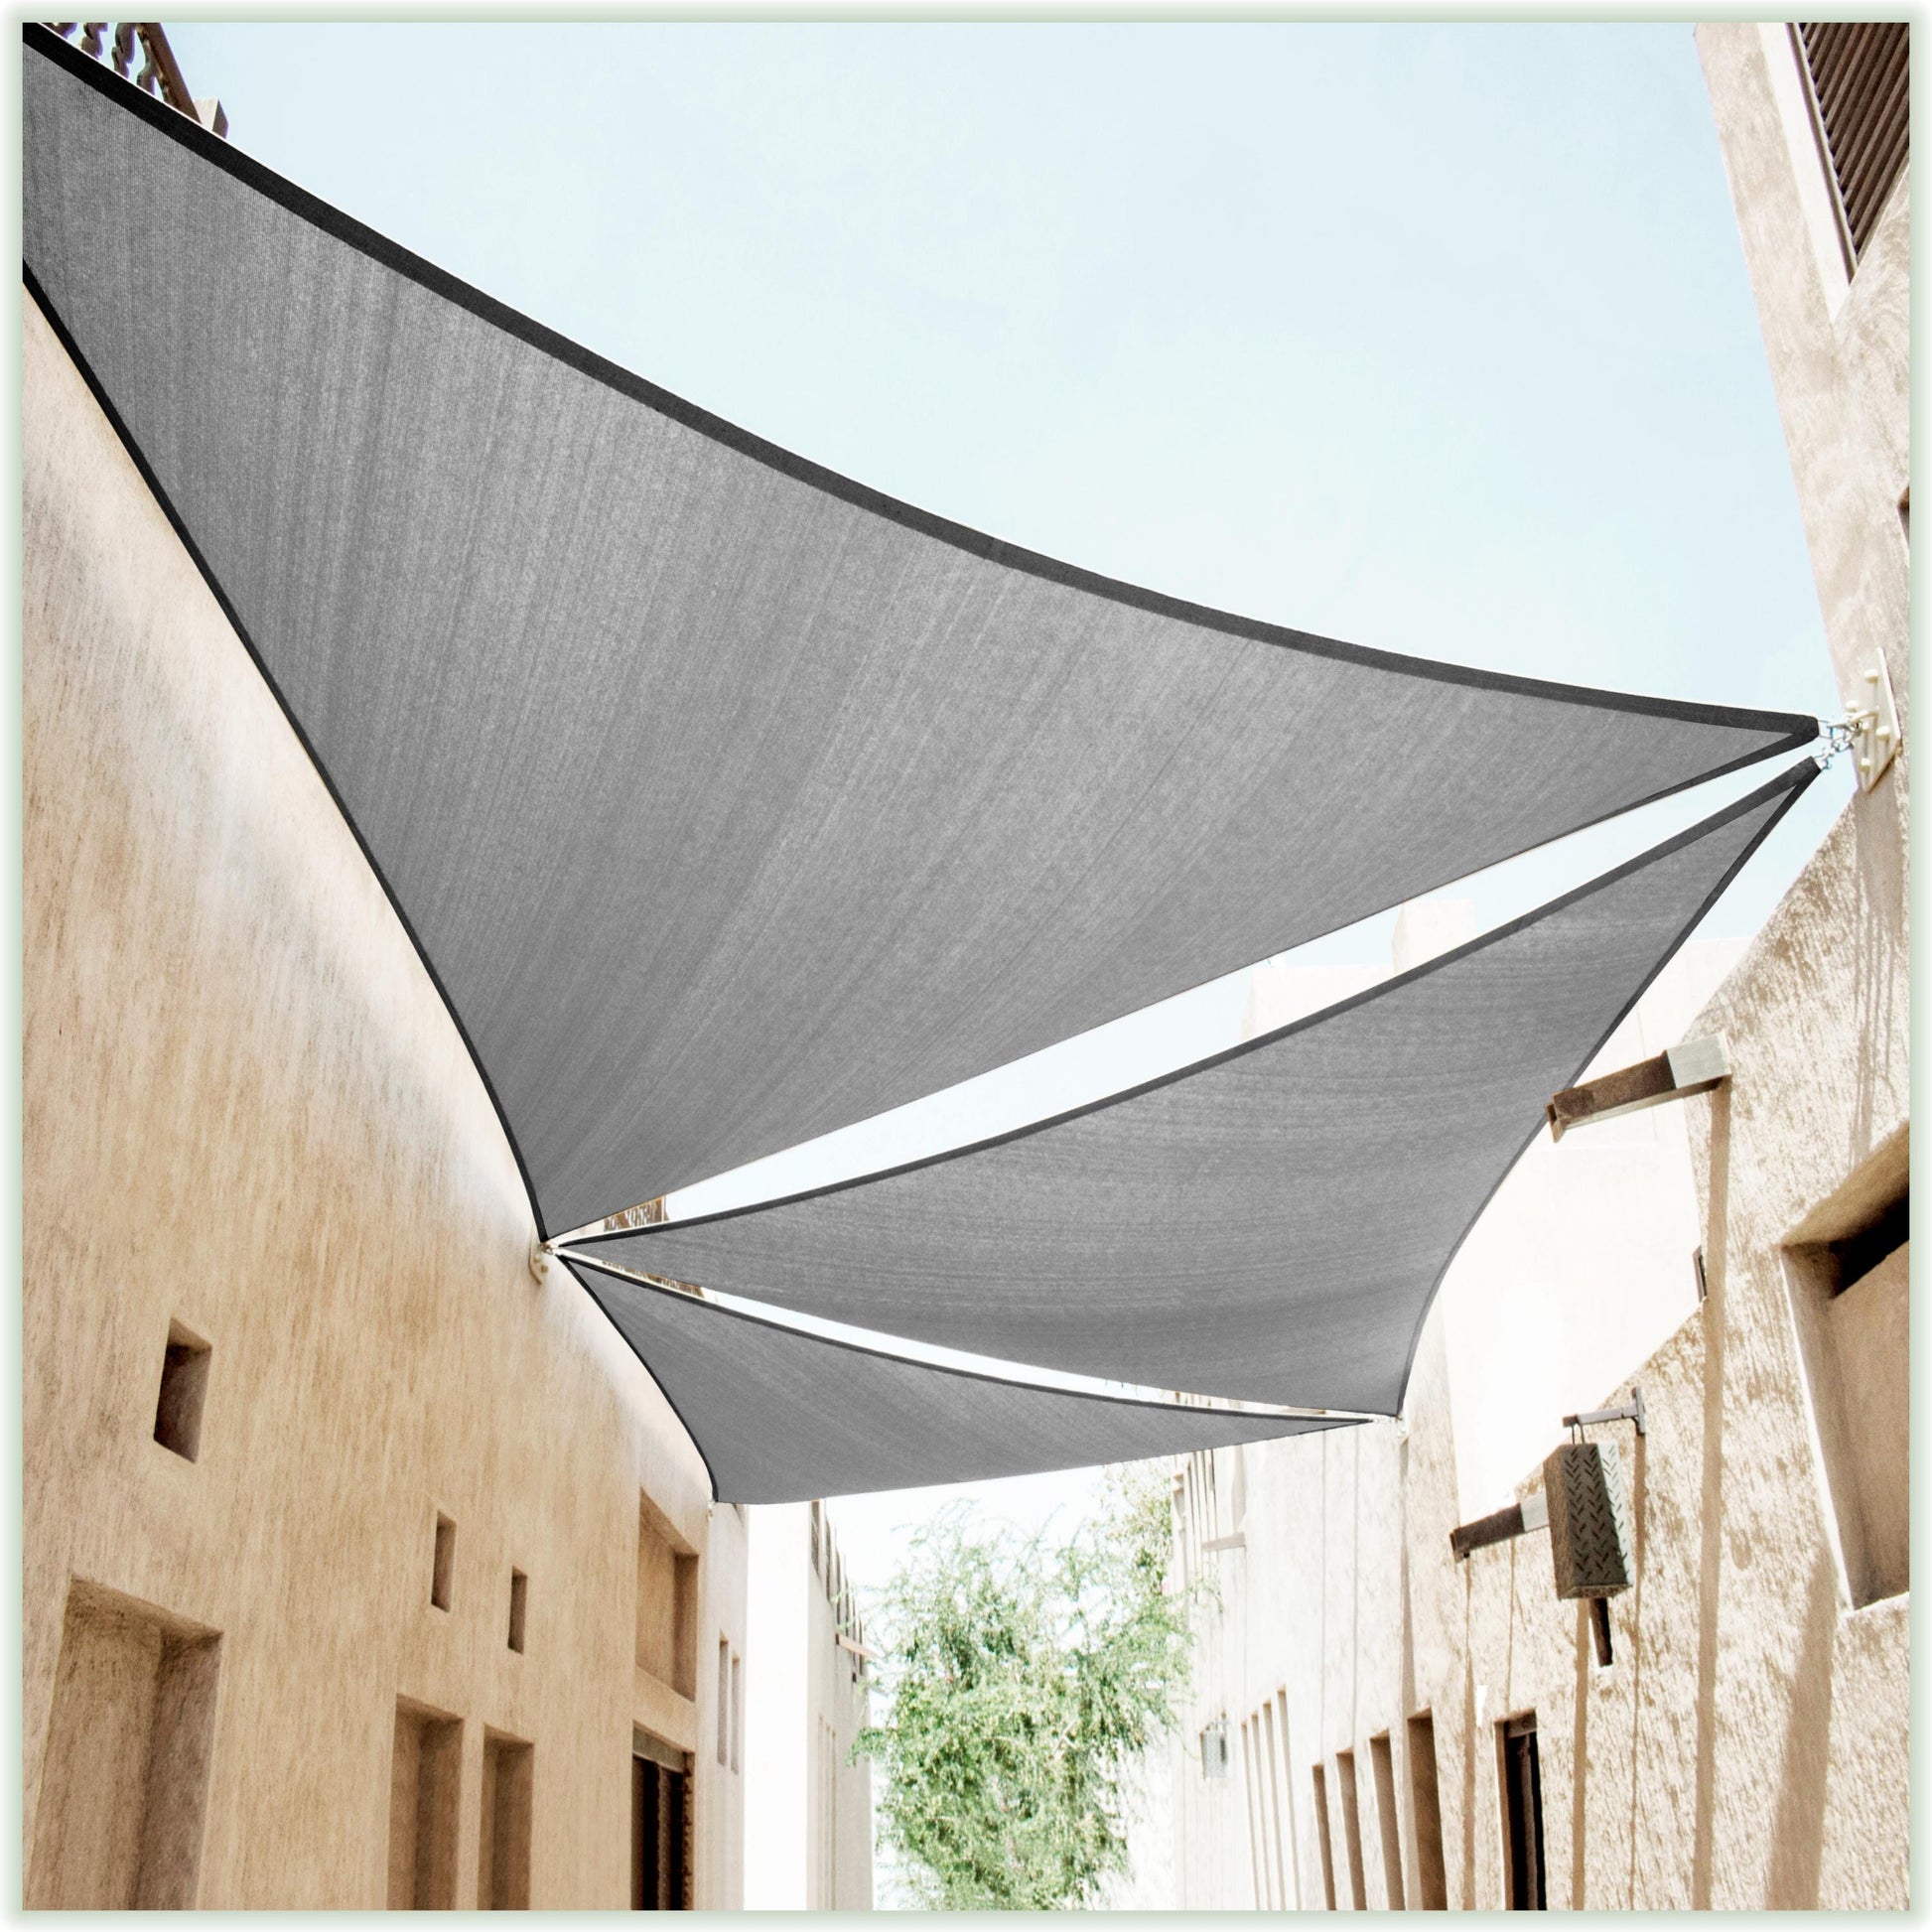 Equilateral Triangle Sun Shade Sail Canopy, Commercial Grade, 11 Sizes, 8 Colors Sun Shade Sail Colourtree 32' x 32' x 32' Grey 